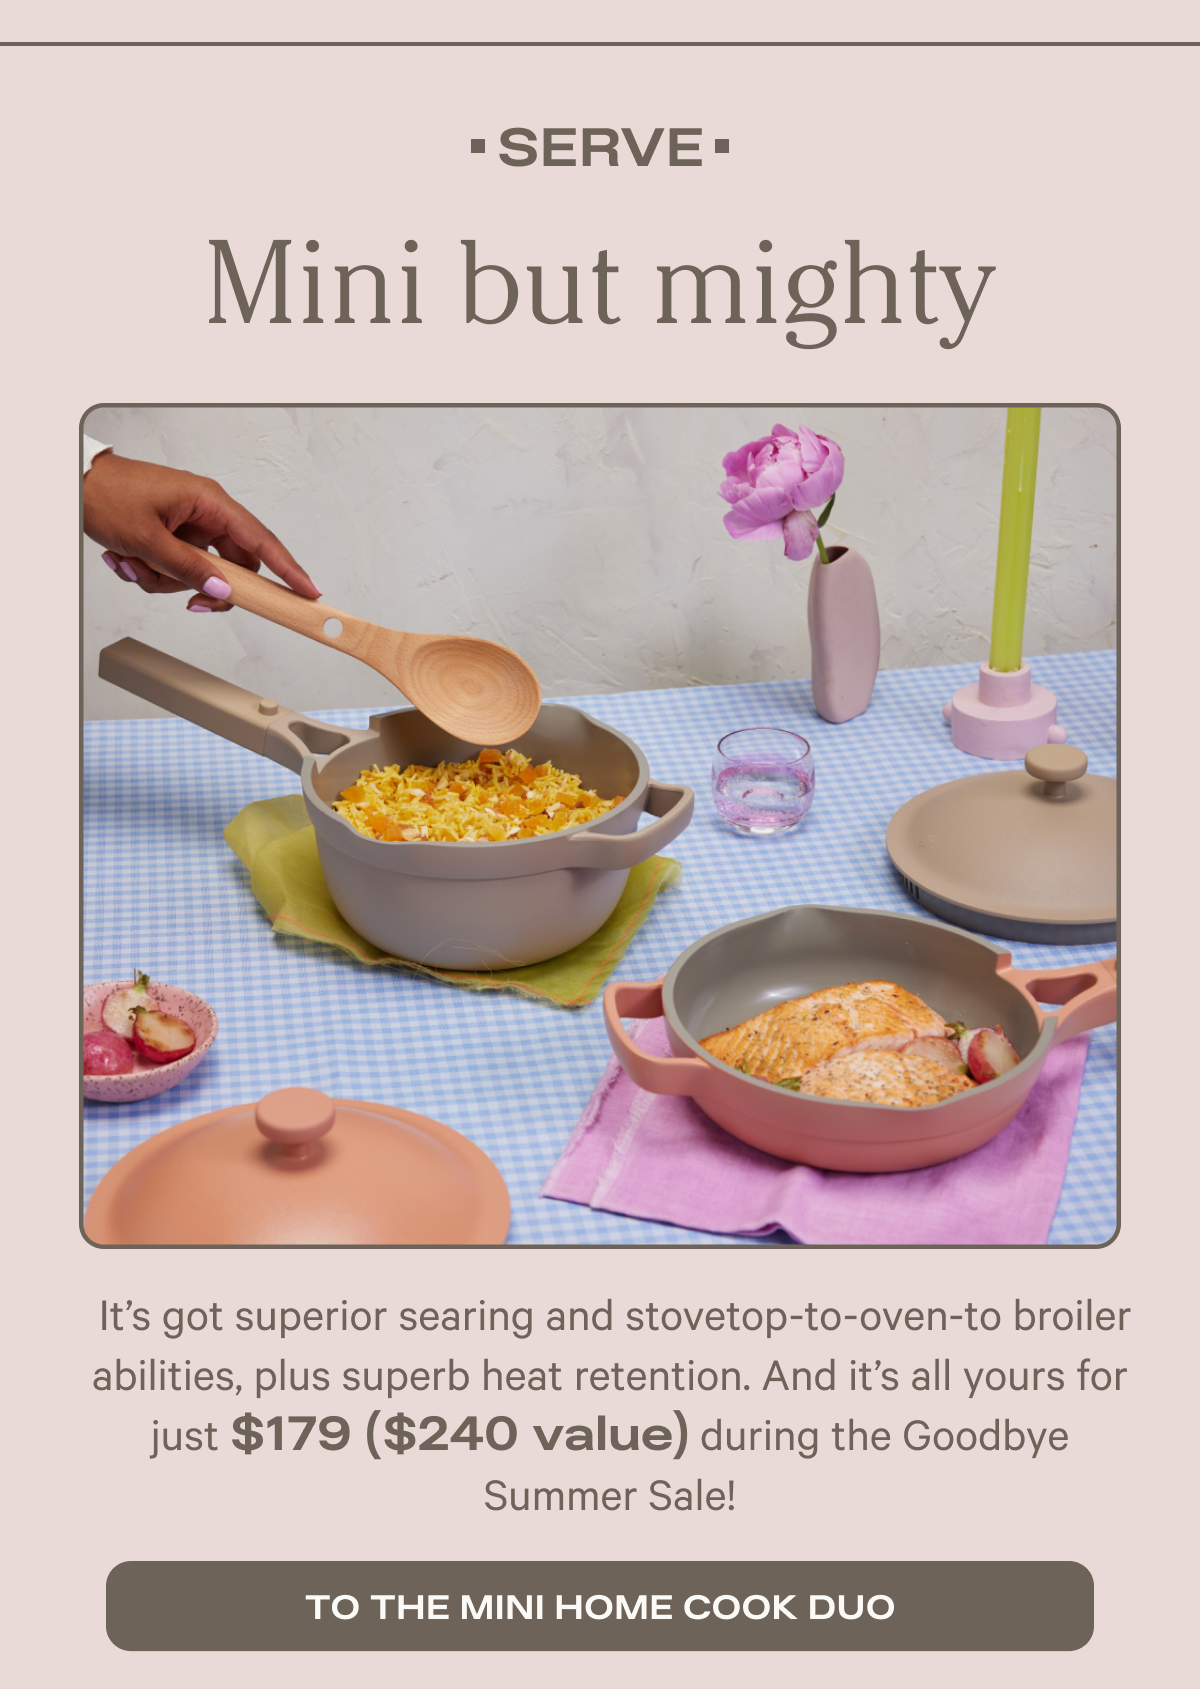 Serve - Mini but mighty - From cooking up the perfect eggs to whipping up sides, the cute and super-convenient Mini Always Pan + Mini Perfect Pot go easily from stovetop to table! - To the mini home cook duo